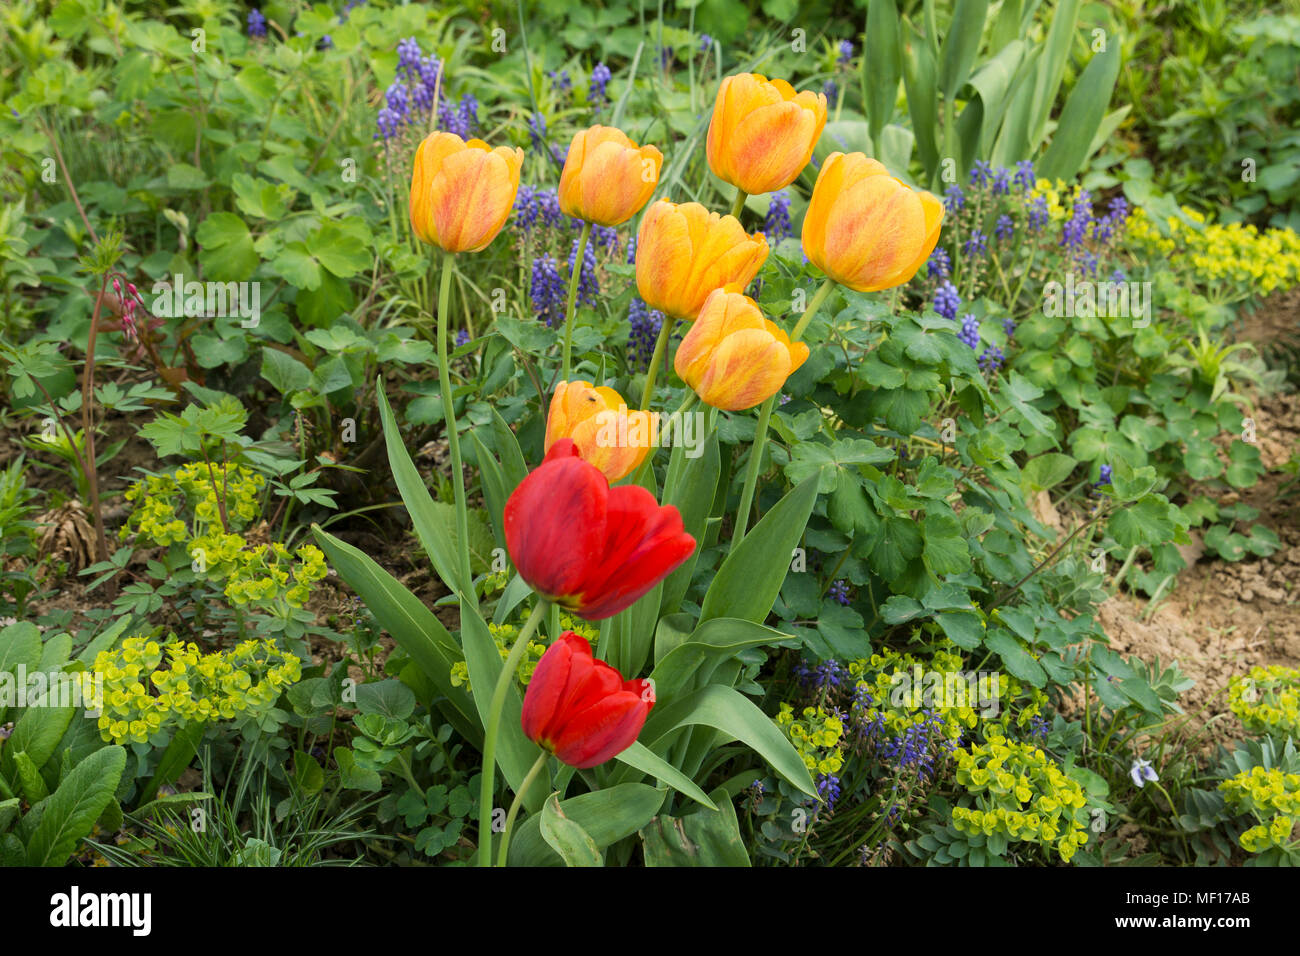 Red and yellow tulips in a garden Stock Photo